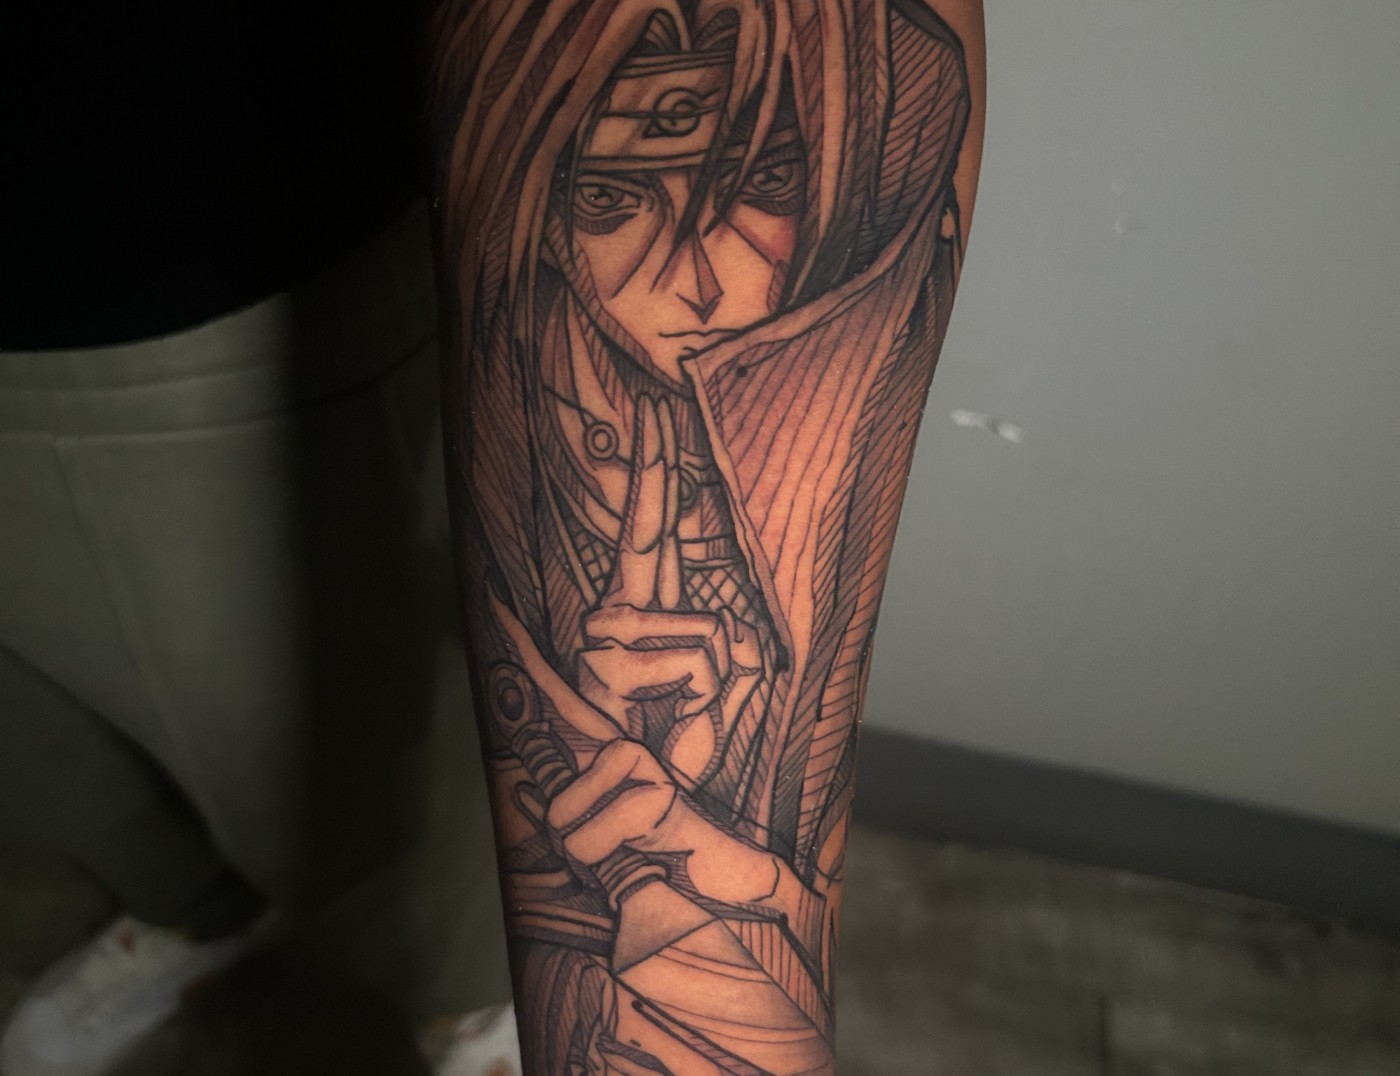 Itachi Uchiha Naruto Manga Anime Tattoo in Black Ink by Lyric TheArtist. Itachi is a popular character in the Naruto Manga anime serious created by Masashi Kishimoto. He's both a charismatic leader of his village and an antagonist in the japonense animation series. We're open late night until 2AM. Call 404-973-7828 stop by for a free consultation. Walk ins are welcome.